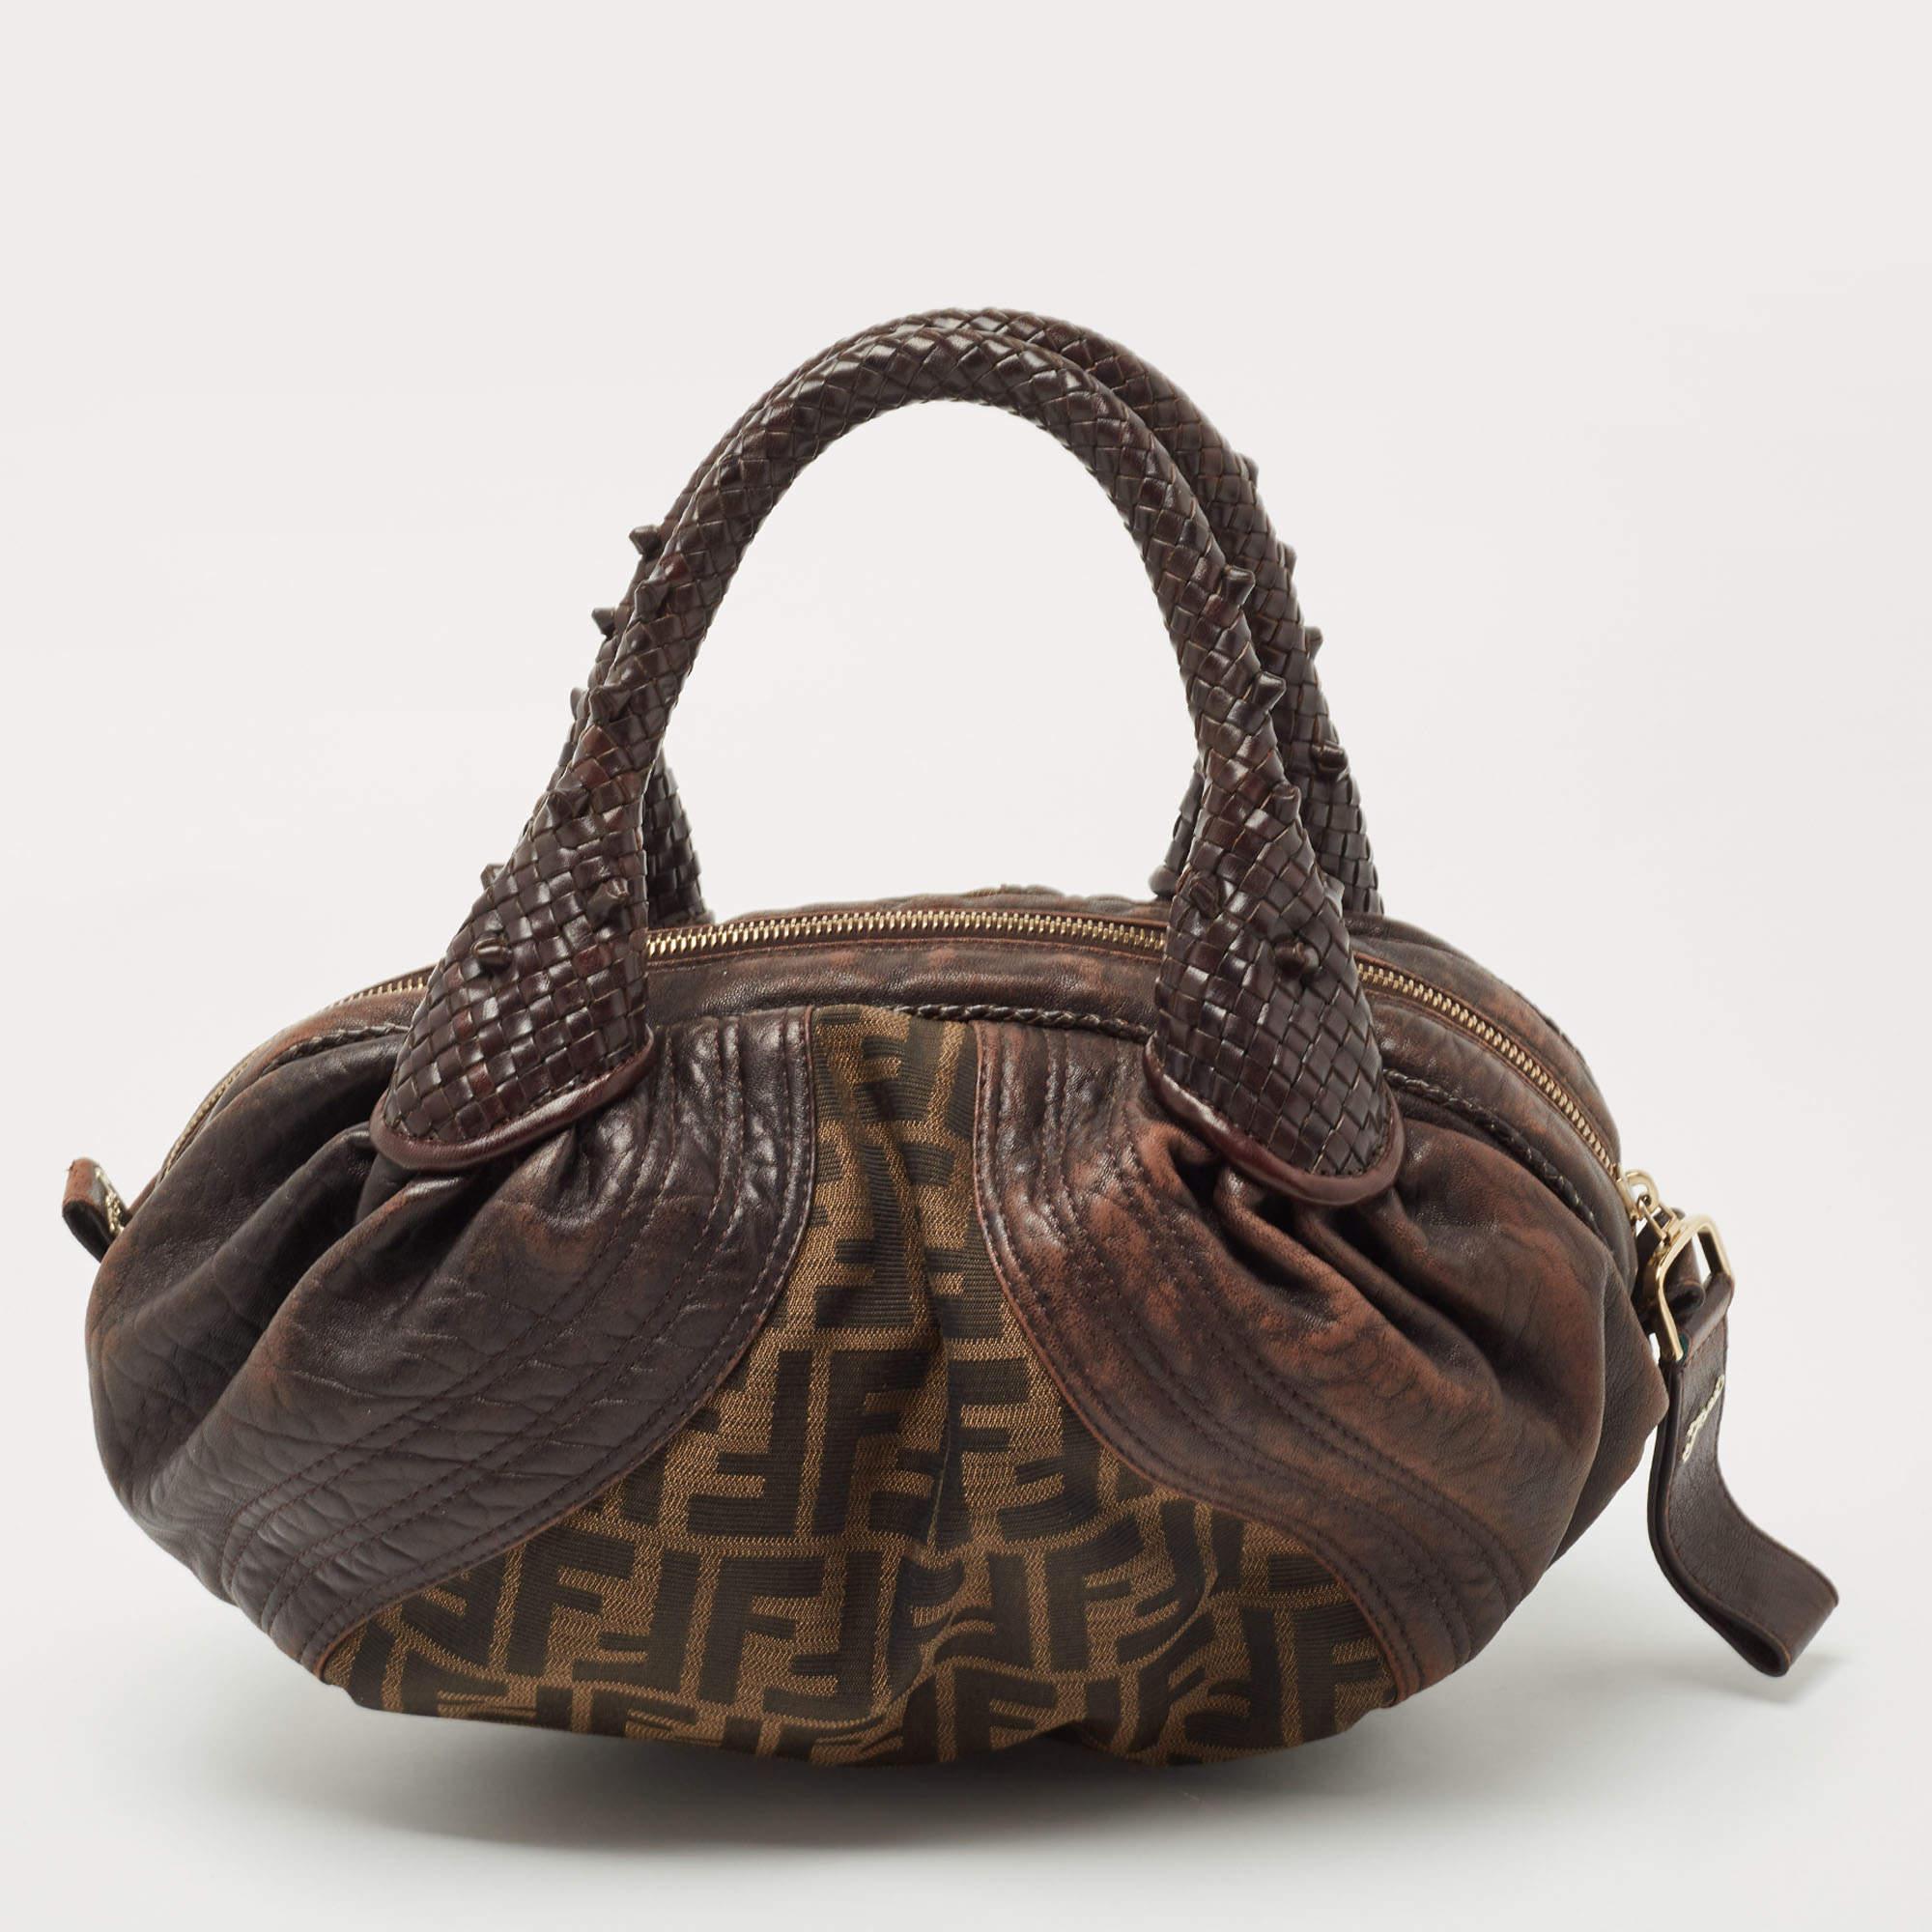 Displaying exquisite craftsmanship, this fabulous bag will certainly live up to your expectations. Featuring a chic design, it is made from luxe materials and has an interior for carrying your little essentials.

Includes: Original Dustbag

